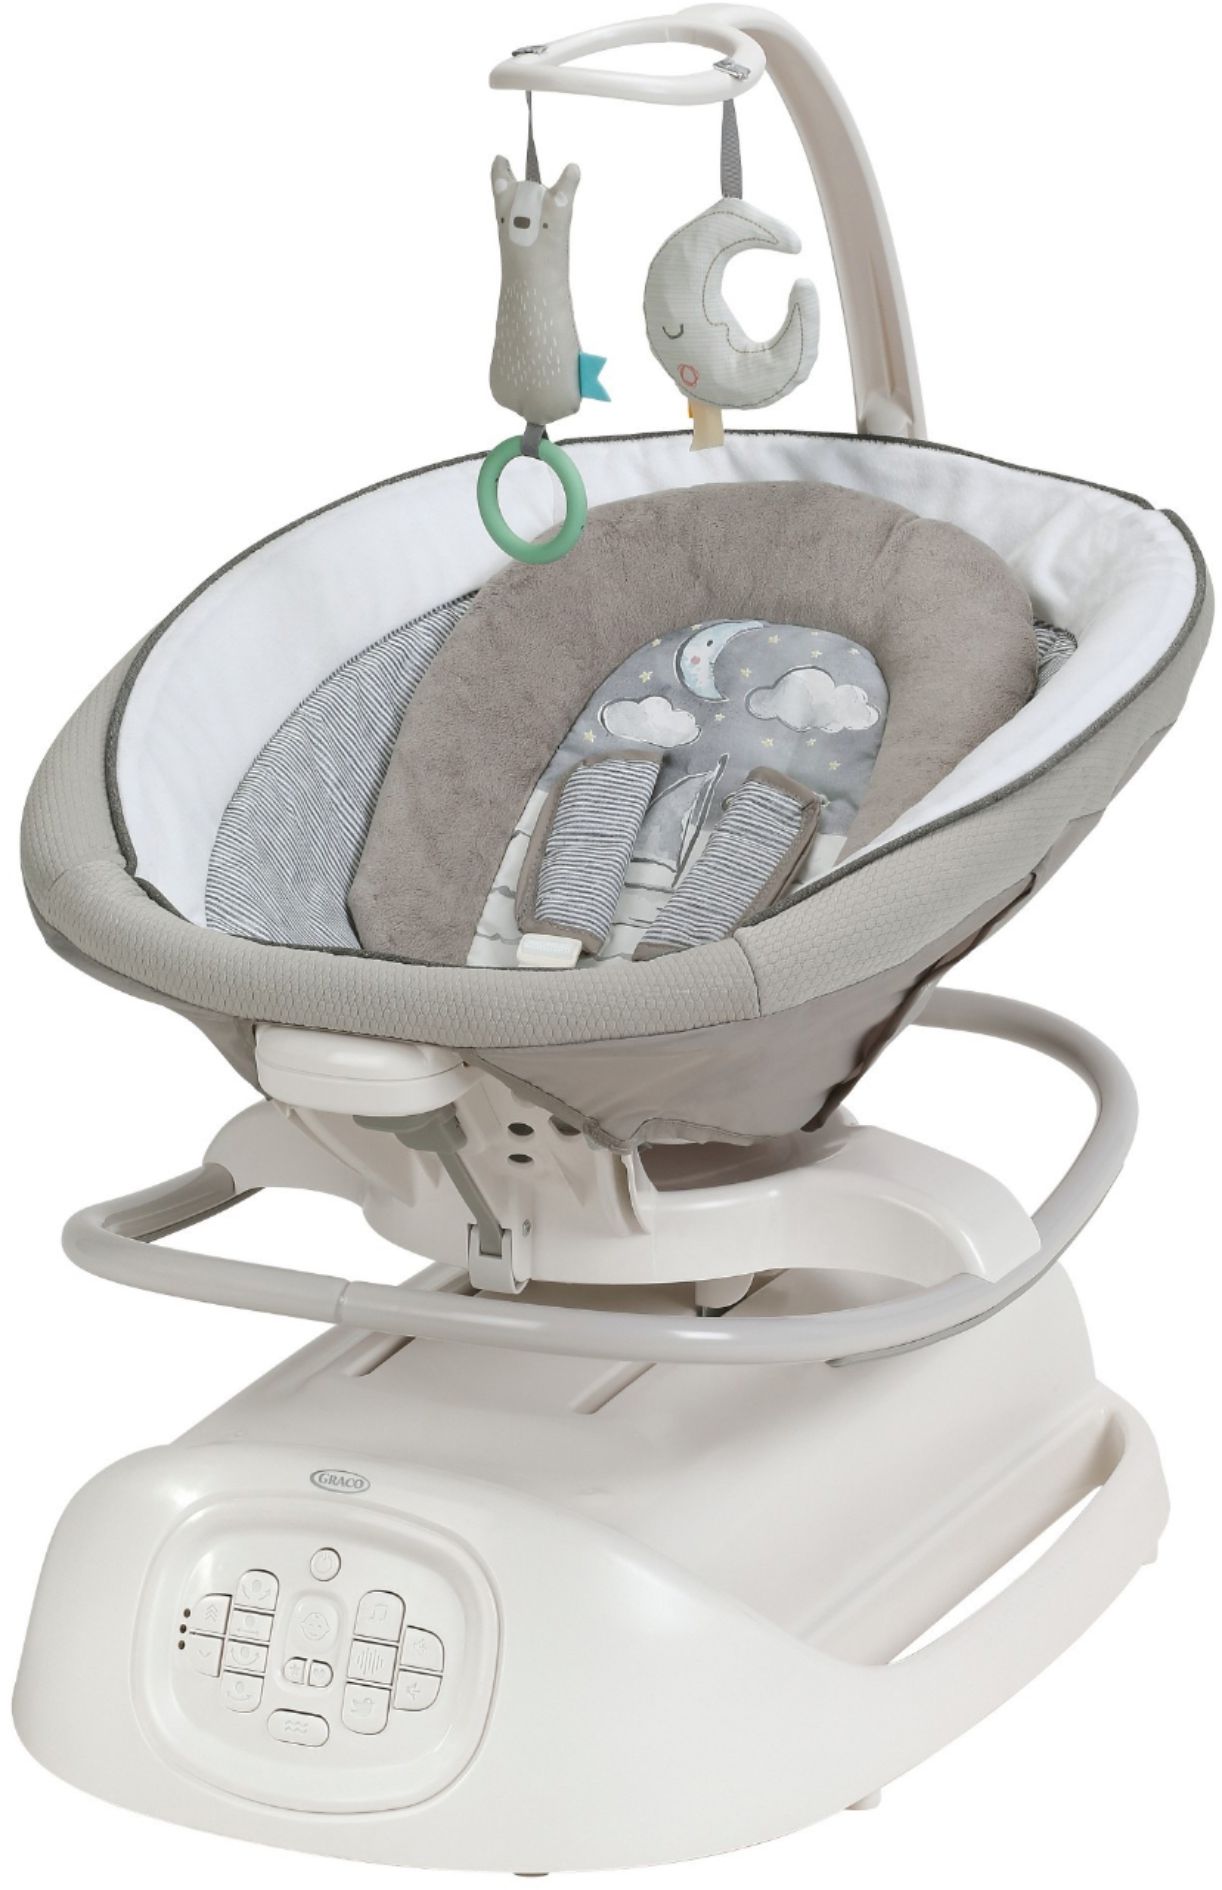 Left View: Graco Sense2Soothe Baby Swing with Cry Detection Technology, Grey, Infant